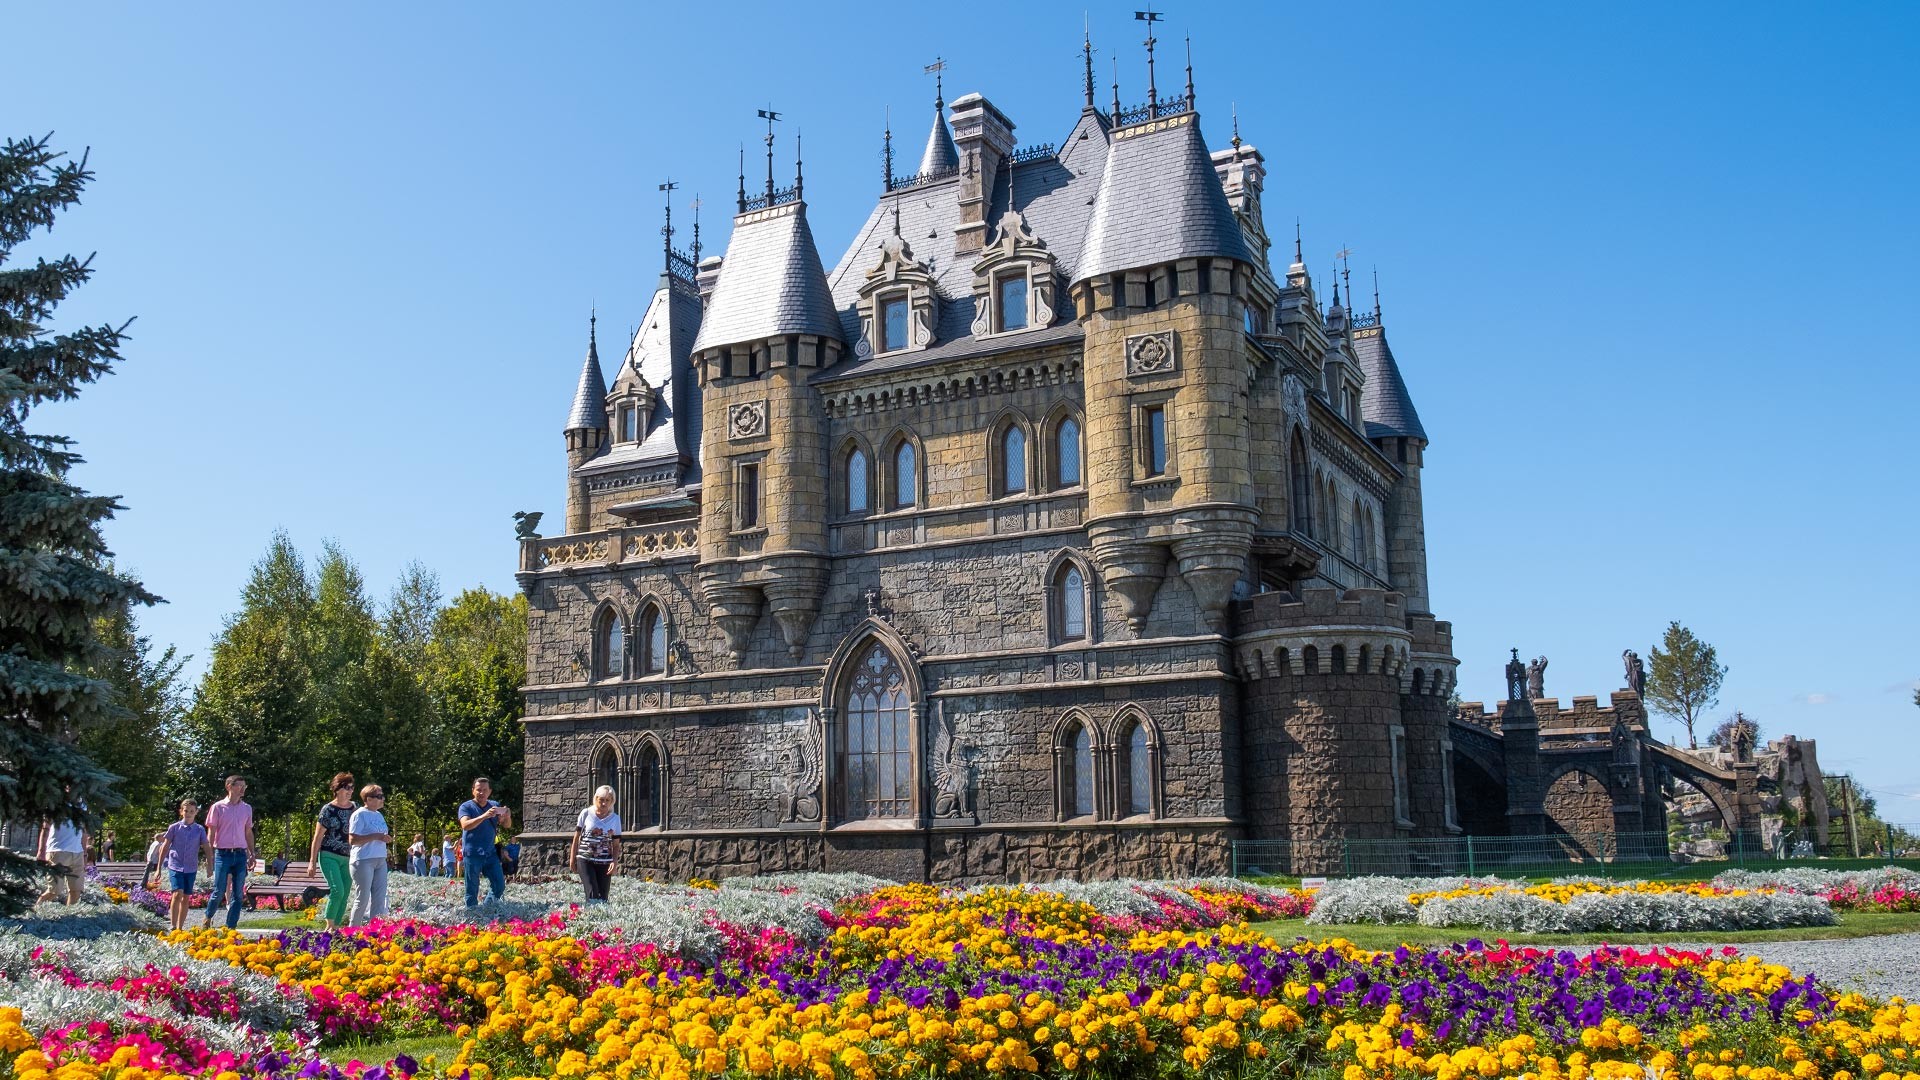 10 Amazing Gothic Castle Design with Beautiful Architecture